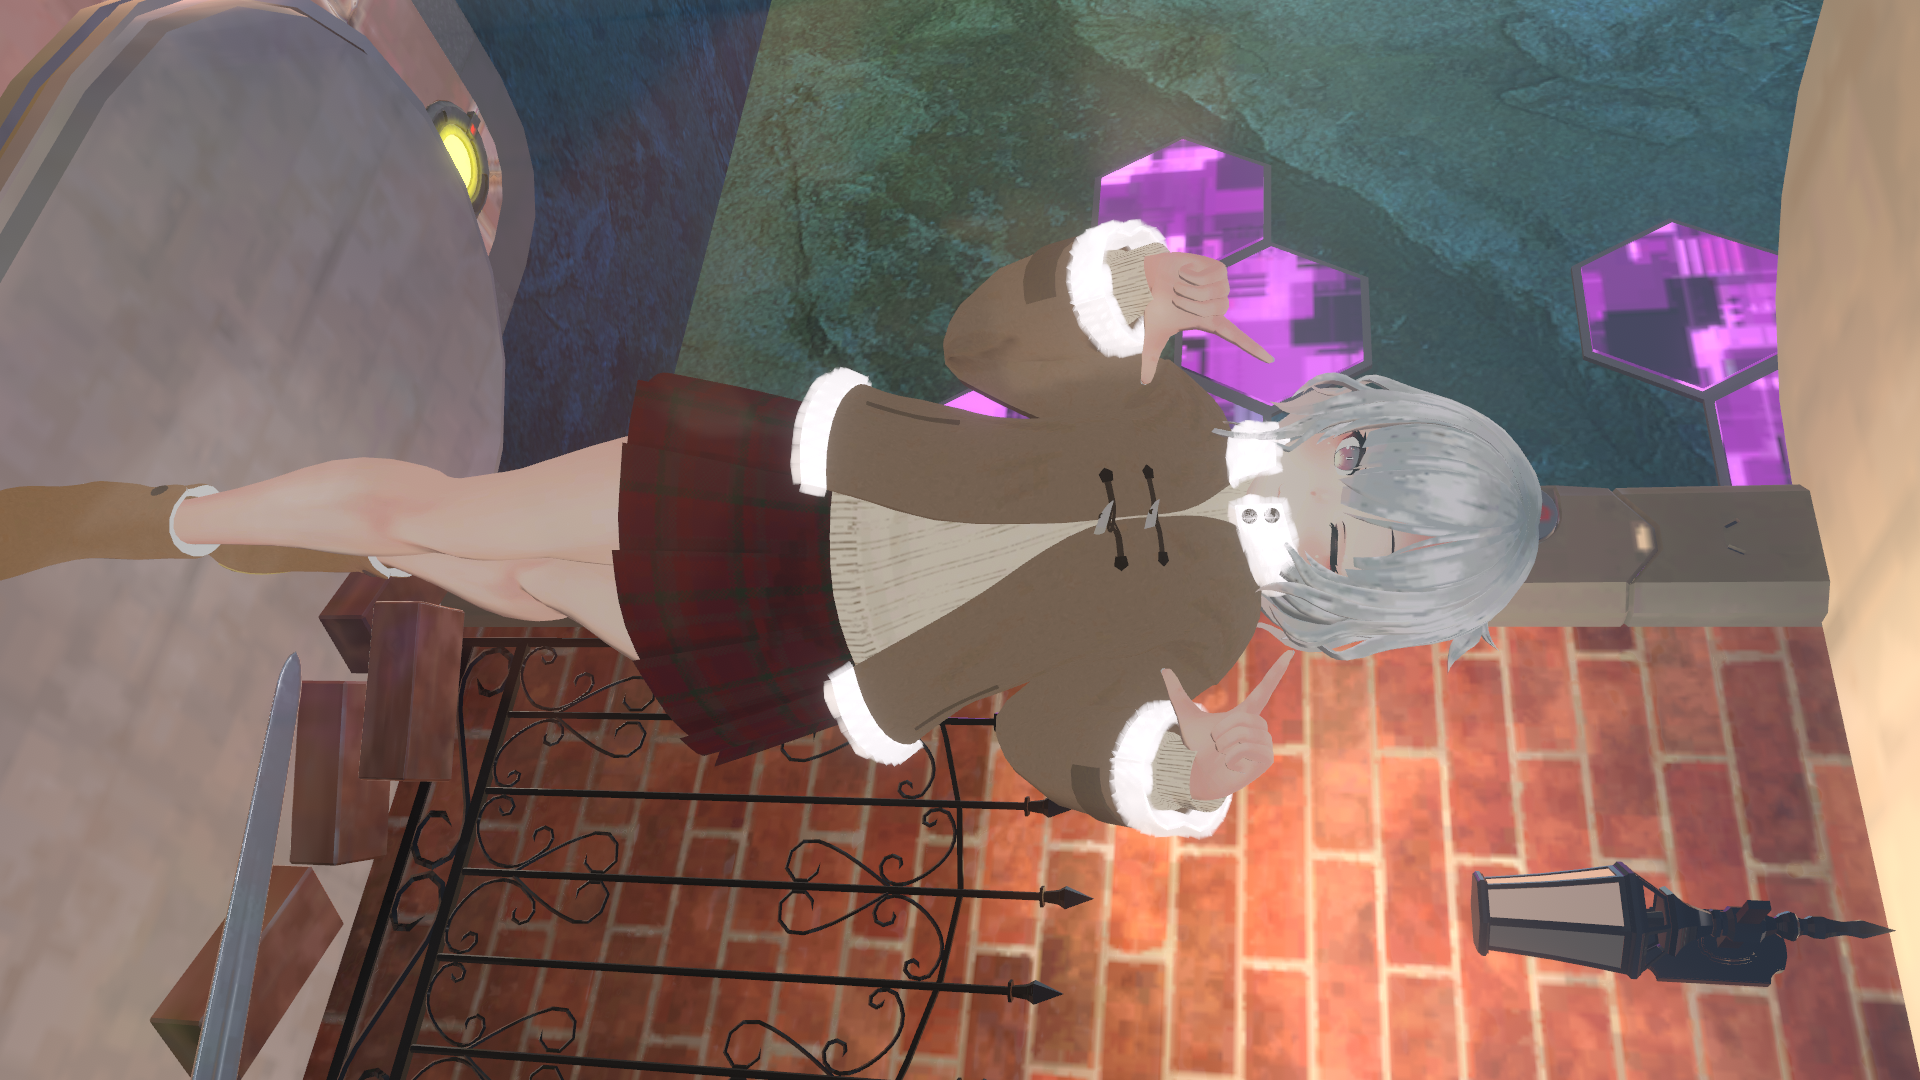 VRChat_1920x1080_2021-12-05_03-41-44.888.png